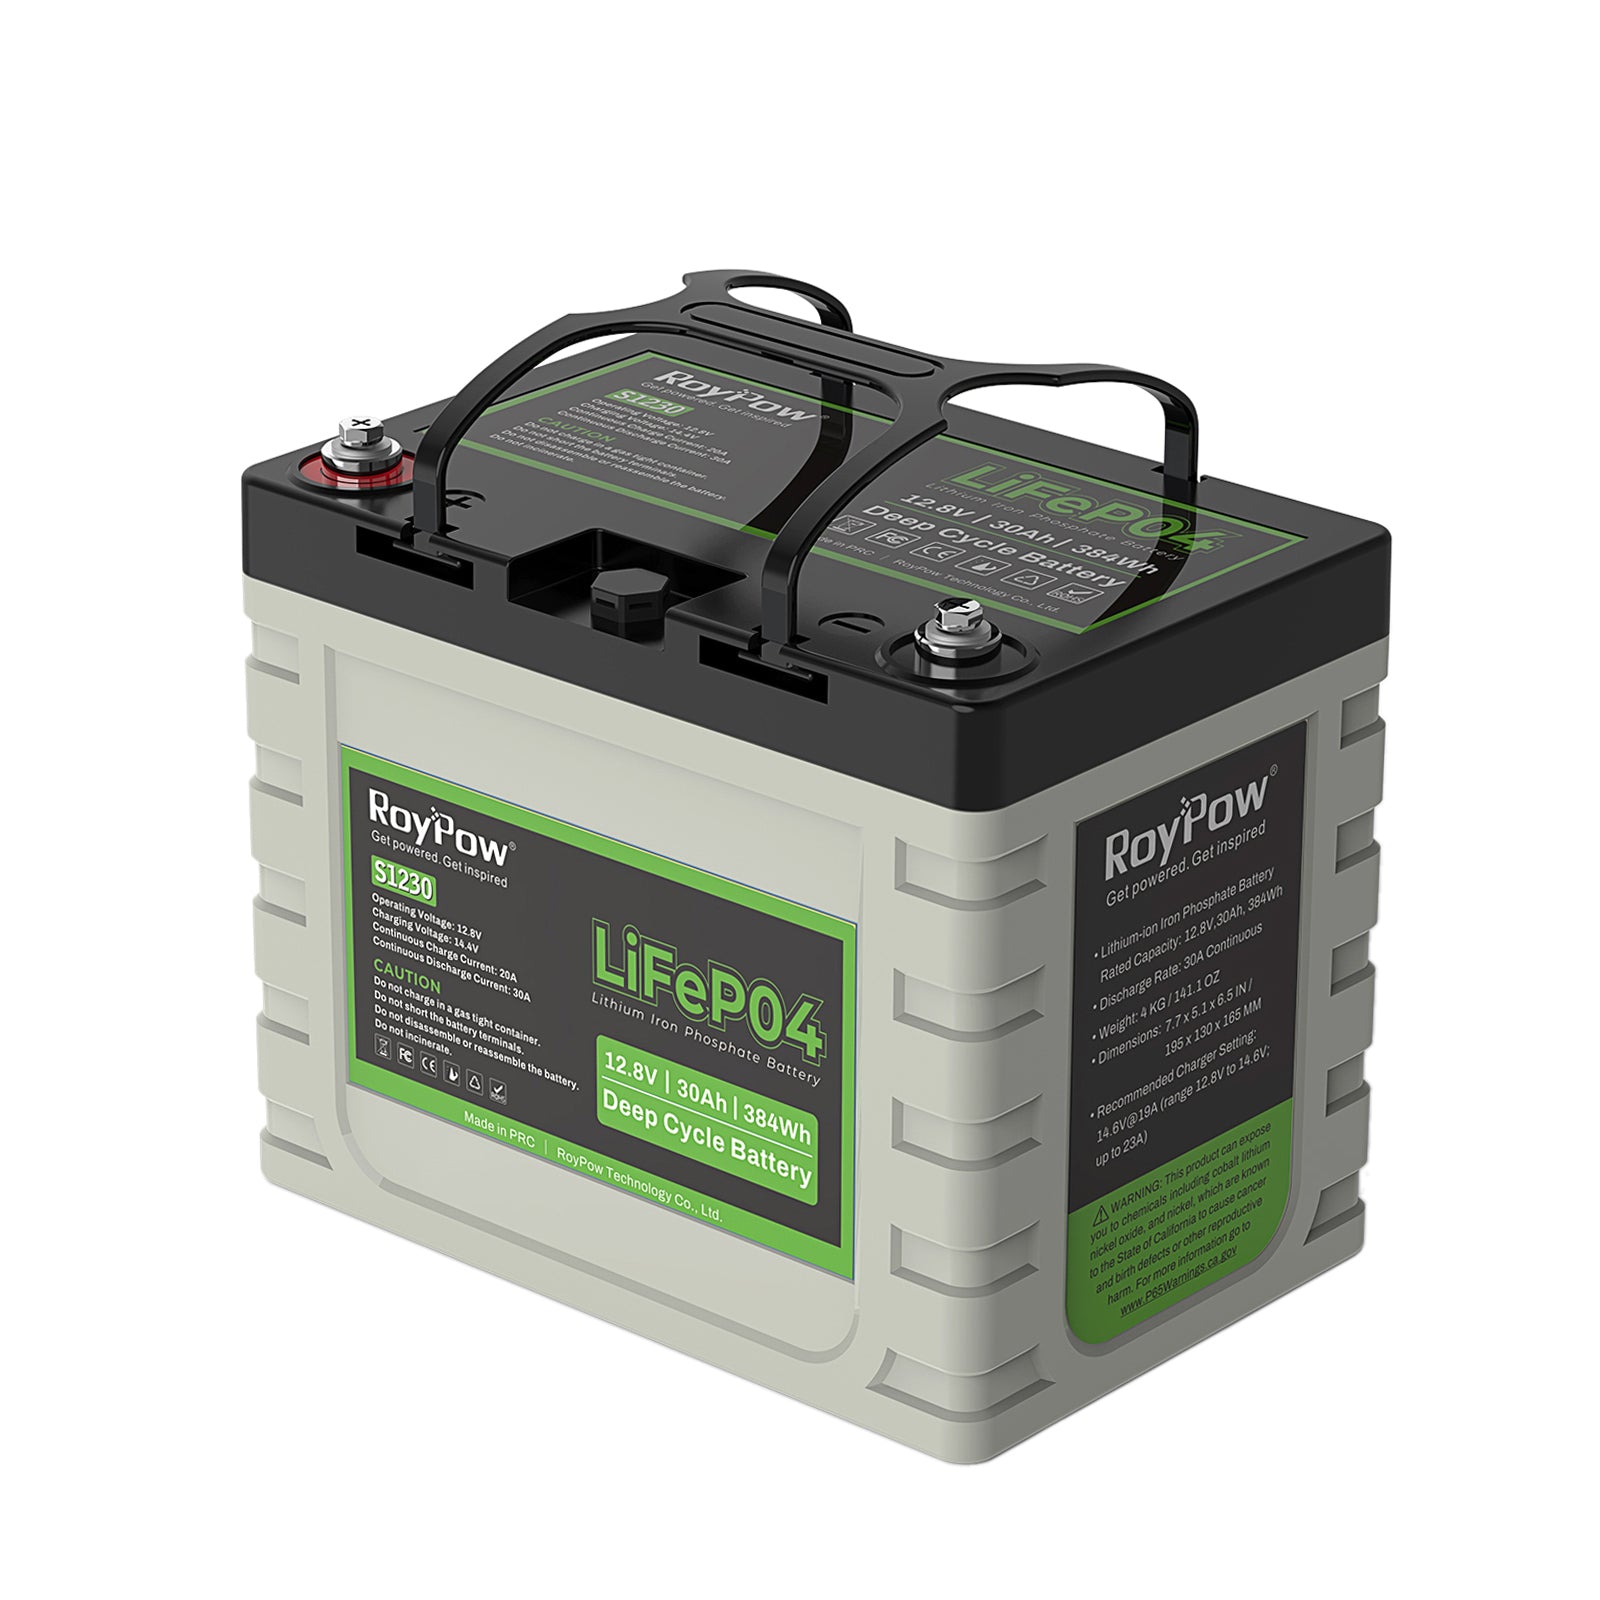 24V 15A LiFePO4 Battery Charger, RoyPow 24V Lithium LifePO4 Battery Charger  29.2V Lithium Battery Charger, 15A Smart Battery Maintainer, Designed for